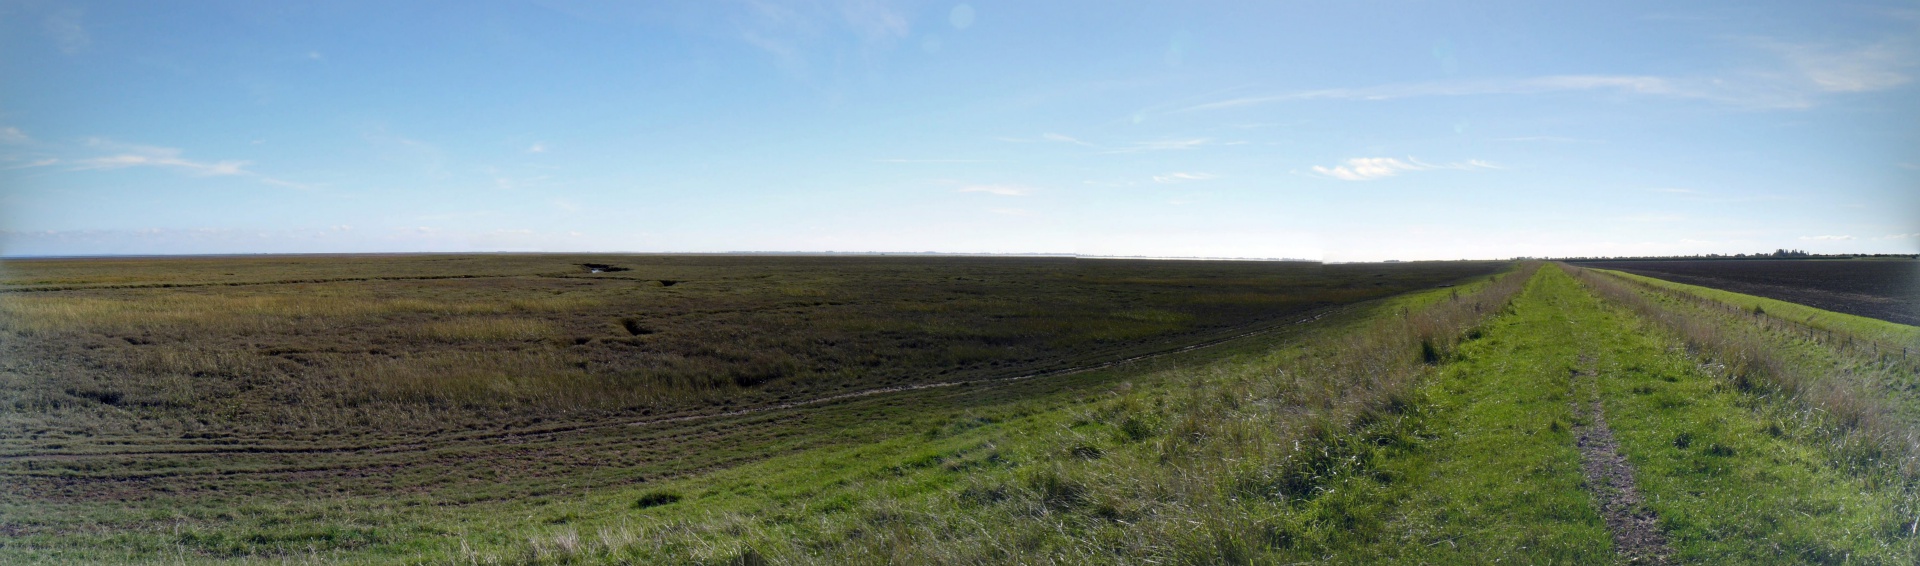 Select this image to see a larger version. P1060882 PANO.
2:07:20pm Mon 3 Oct 2016.
The Wash. Butterwick Low.